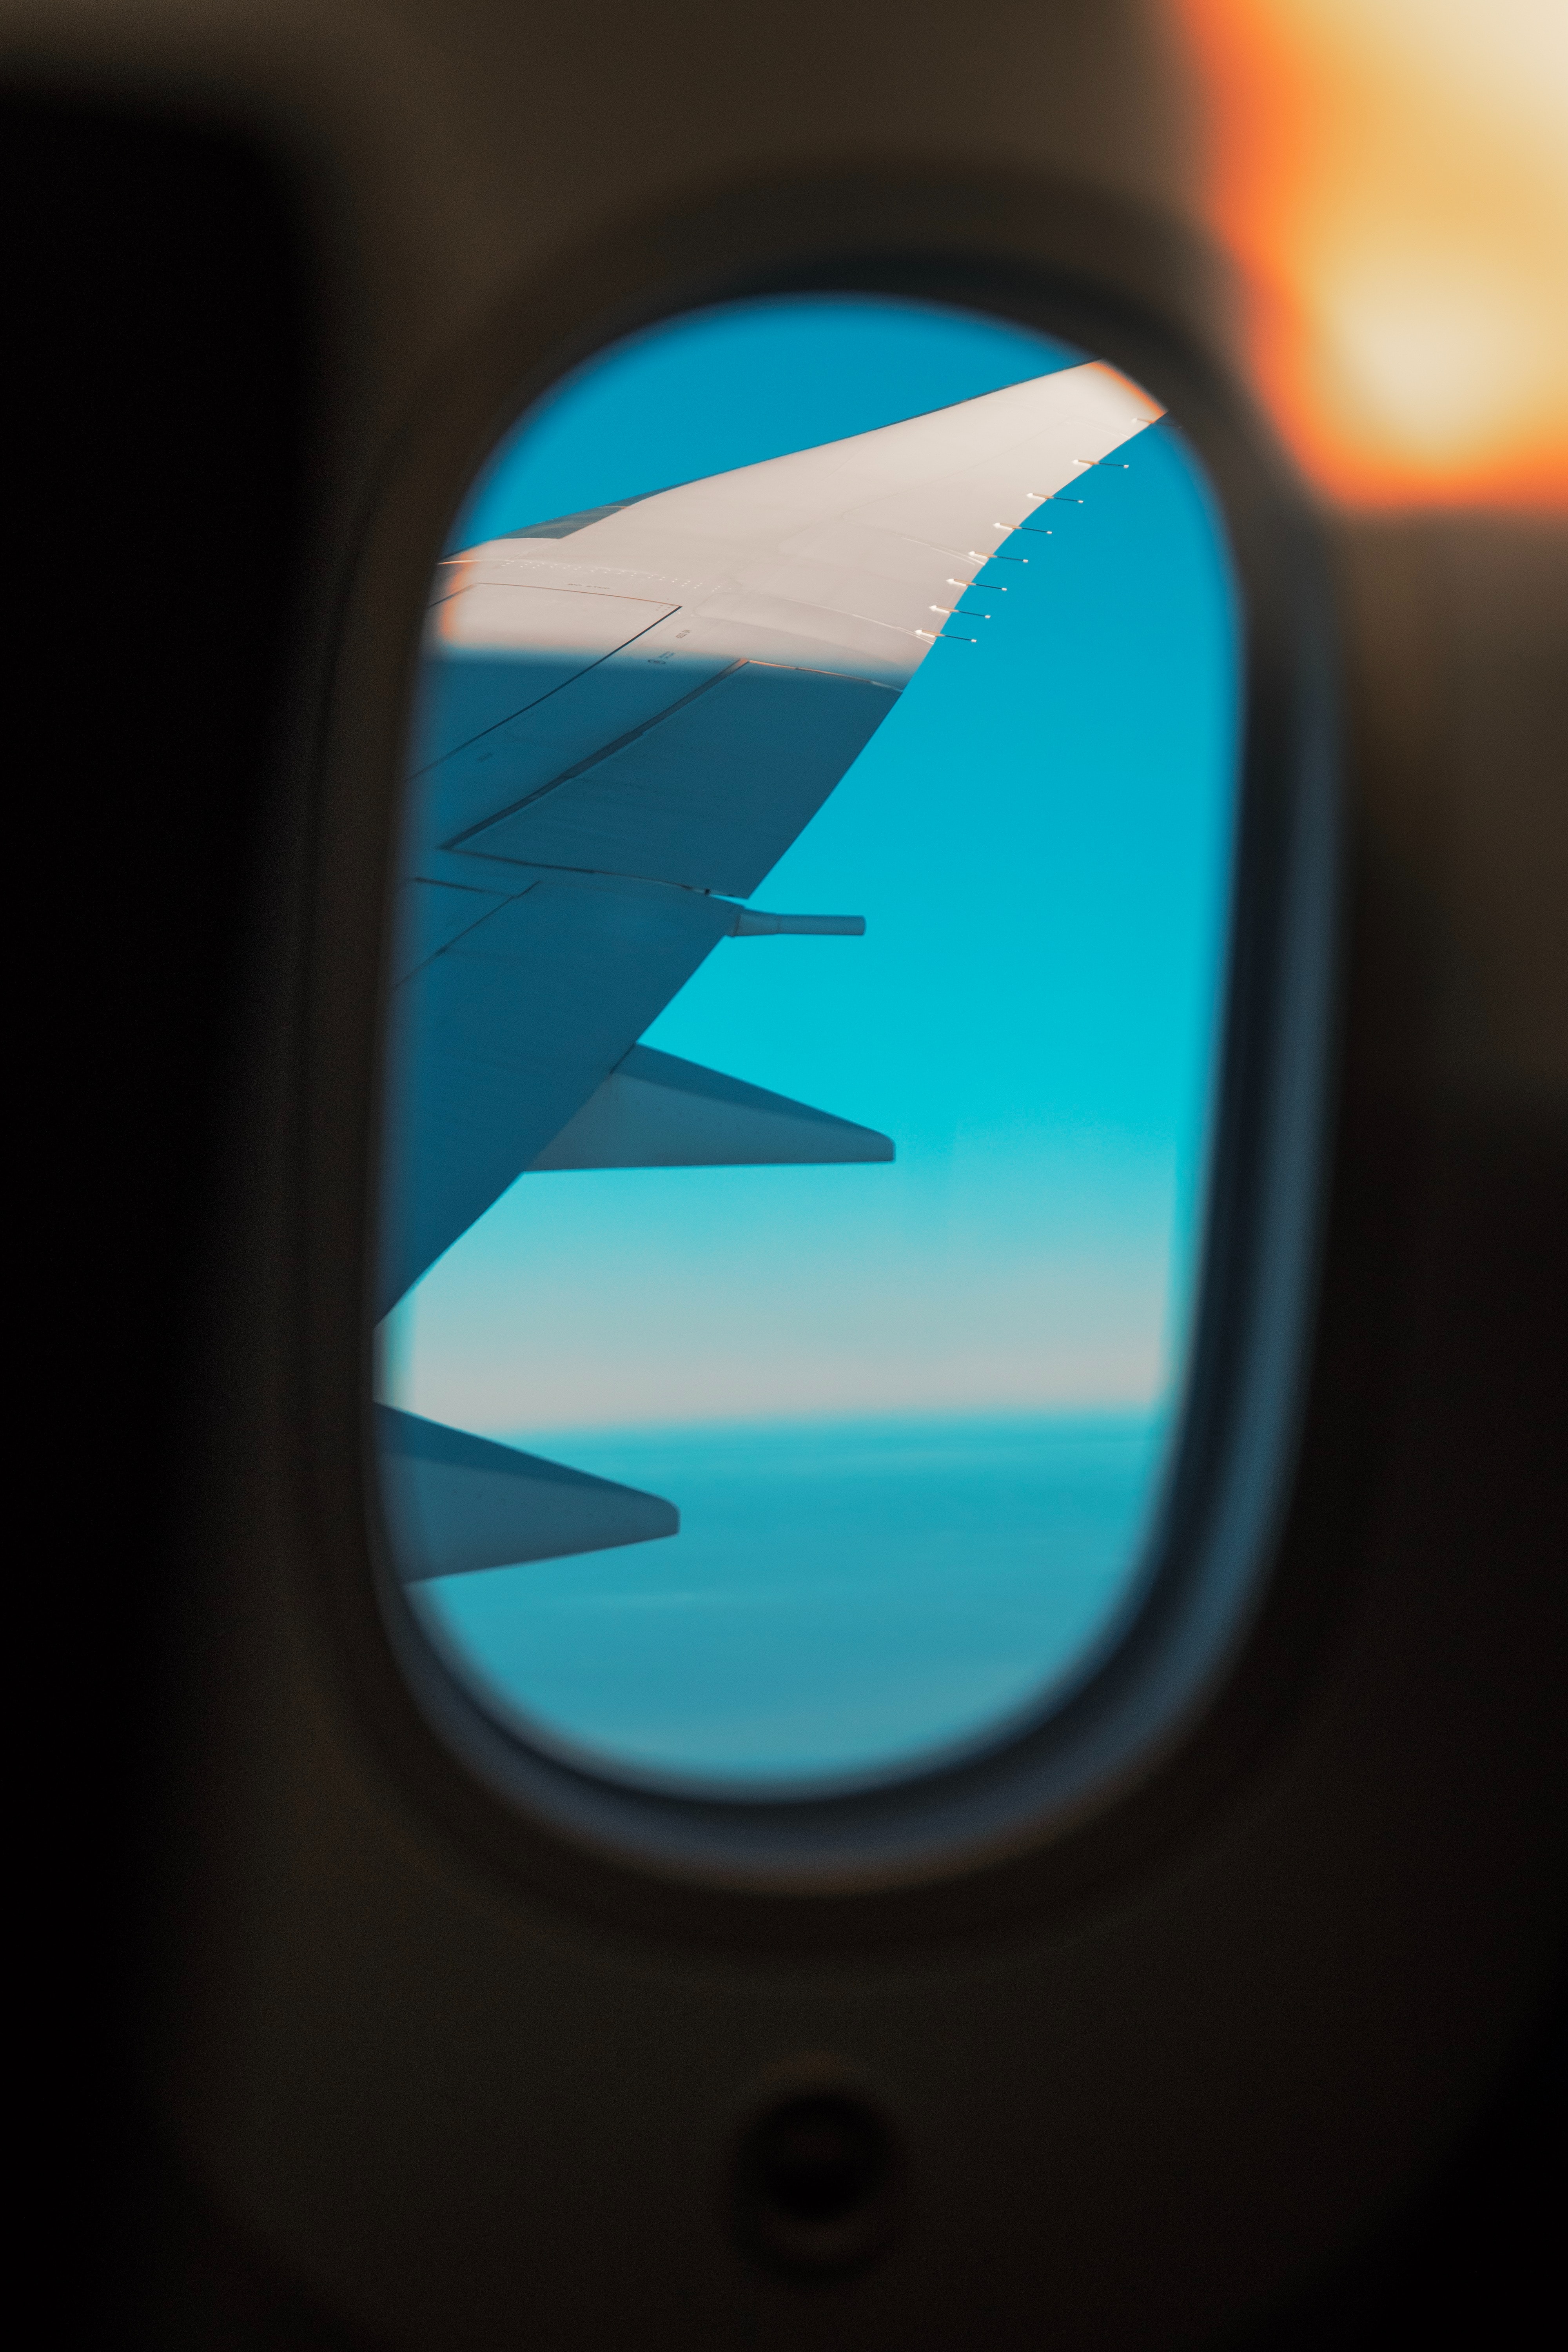 Mobile wallpaper: Miscellanea, Porthole, View, Window, Miscellaneous, Wing,  Airplane, Plane, 82564 download the picture for free.